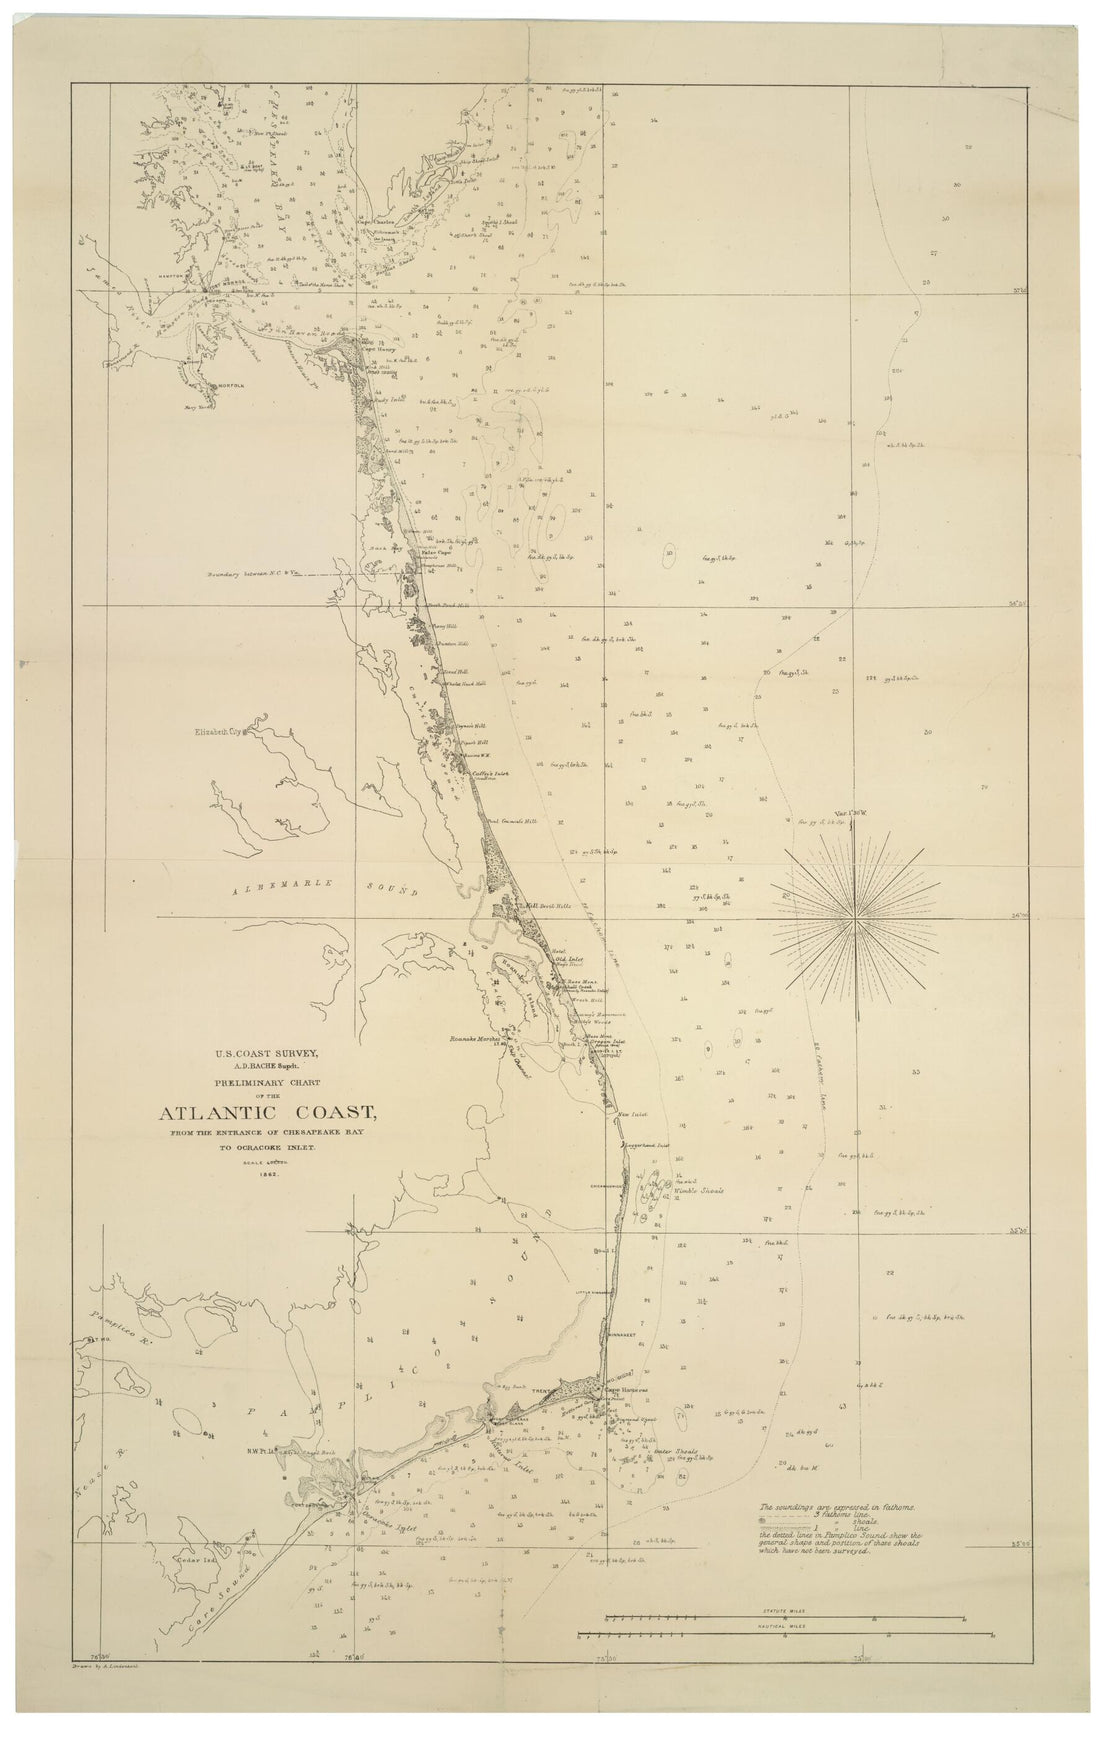 This old map of Preliminary Chart of the Atlantic Coast : from the Entrance of Chesapeake Bay to Ocracoke Inlet (U.S. Coast Survey, A.D. Bache Supdt.) from 1862 was created by A. Lindenkohl,  United States Coast Survey in 1862